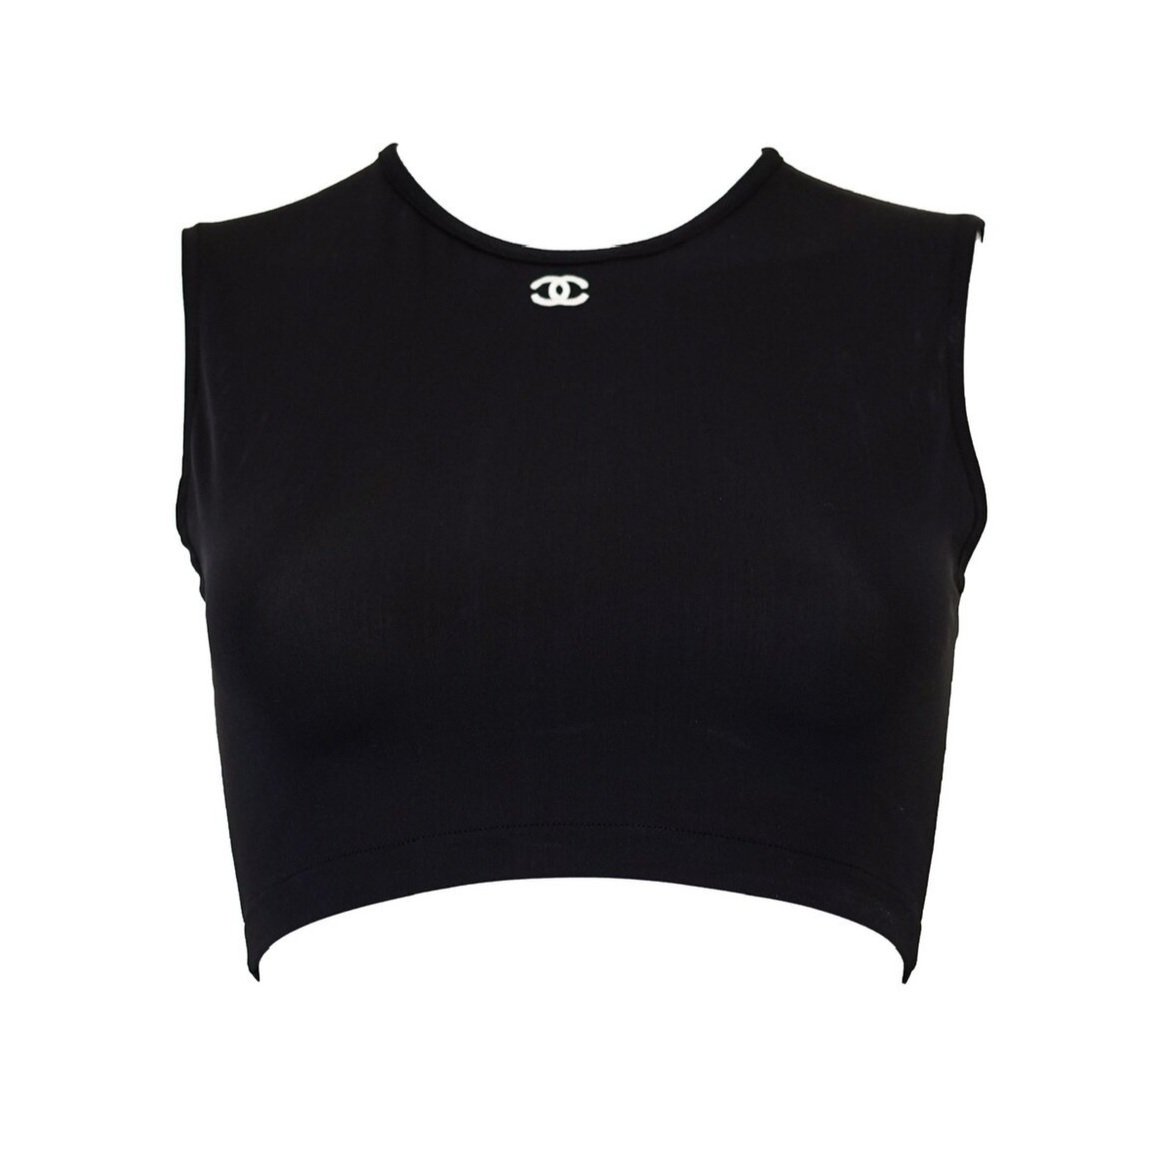 Chanel Black Cropped Top